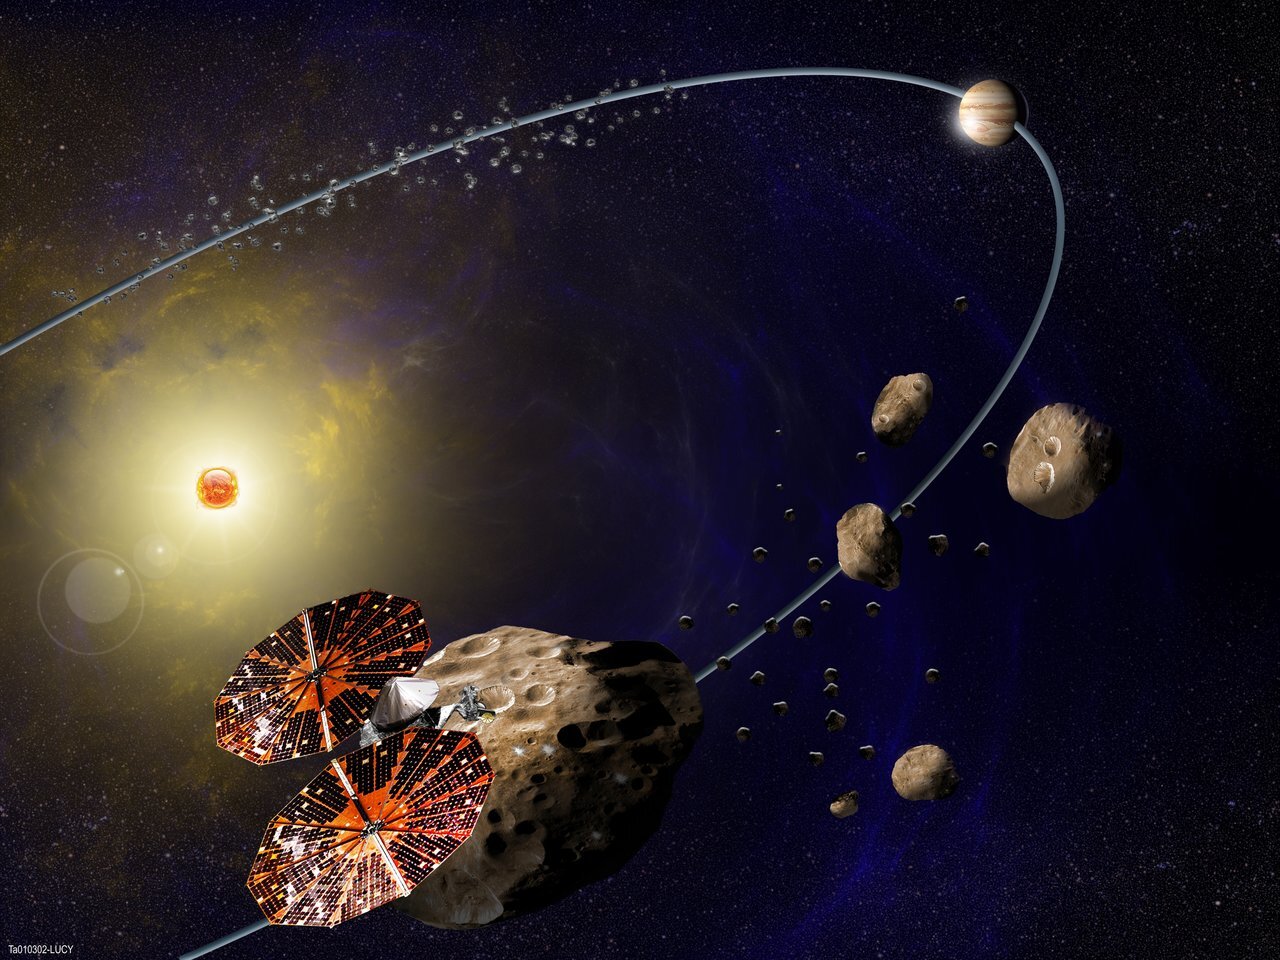 spacecraft and two groups of asteroids in orbit around the sun